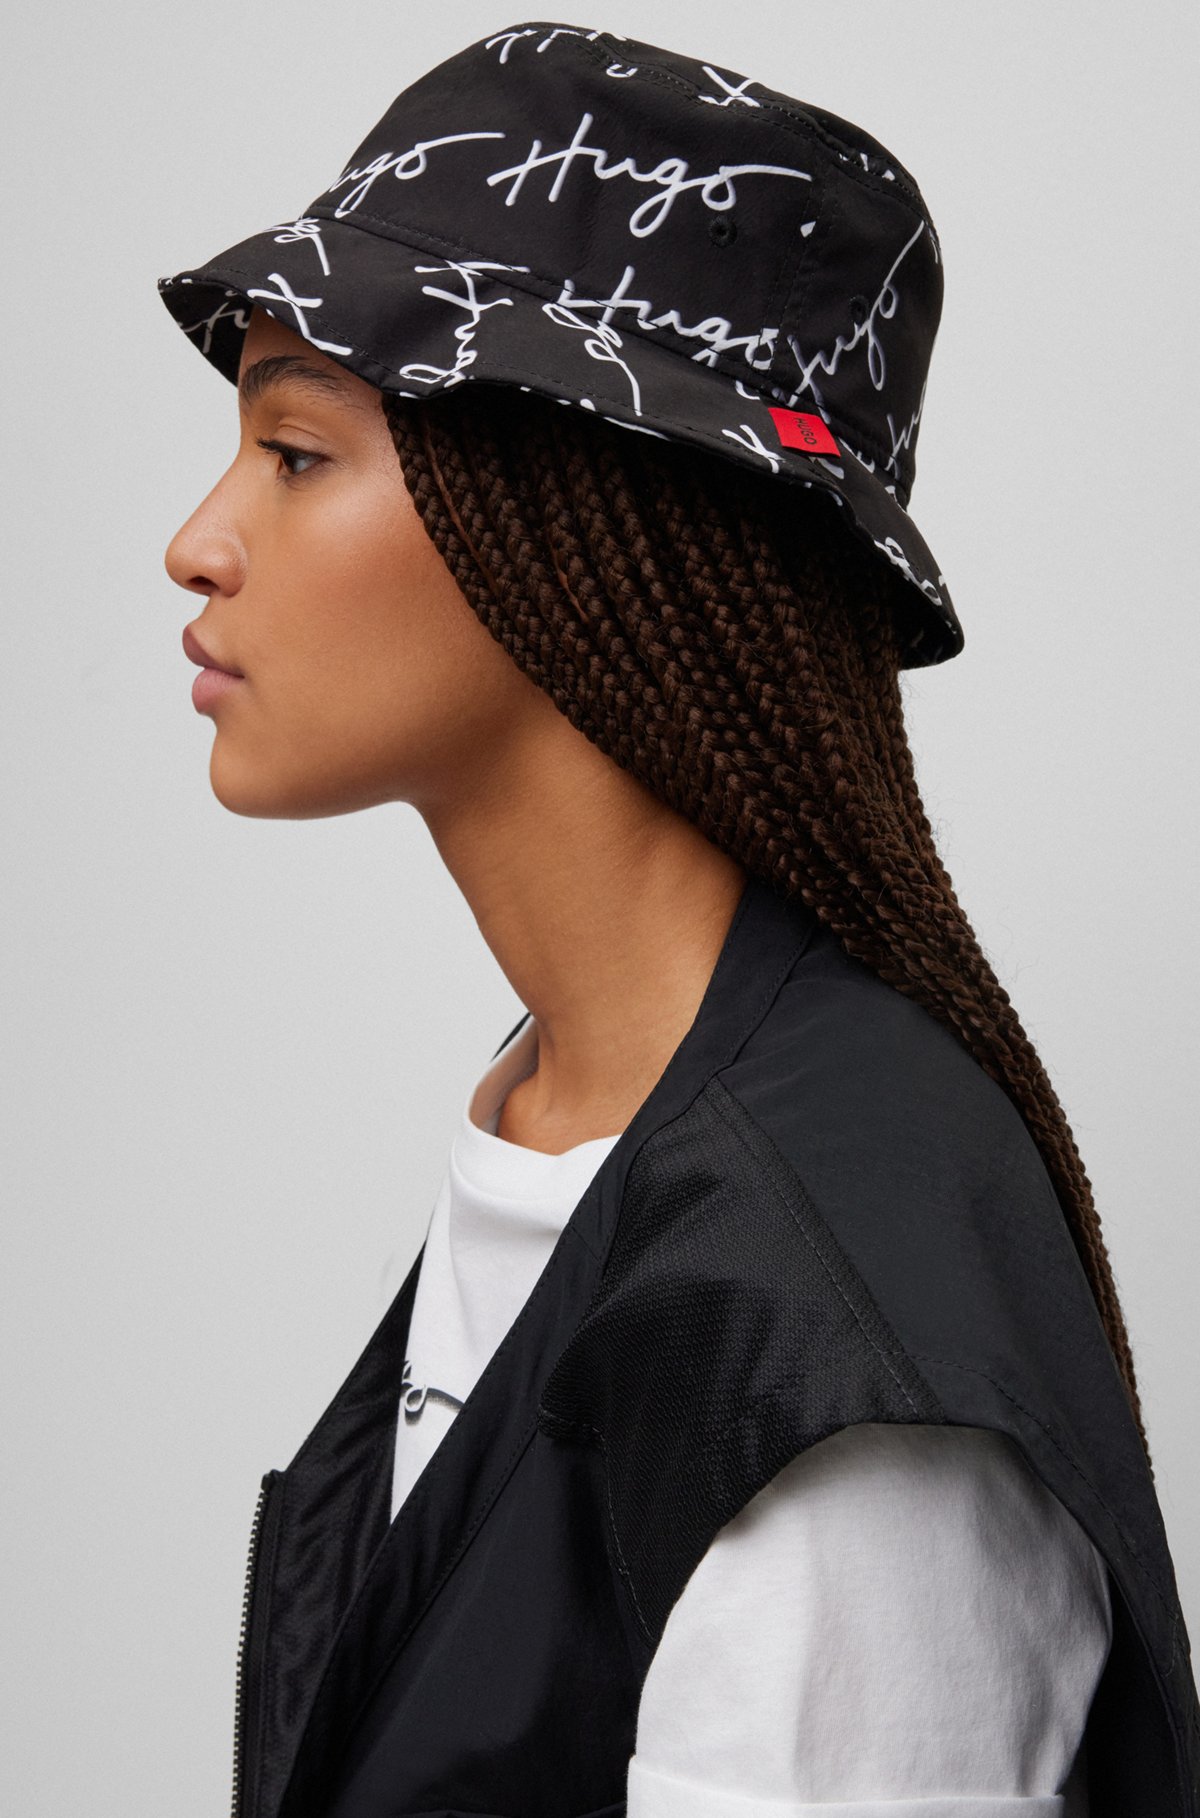 Recycled-material bucket hat with handwritten logo motif, Black